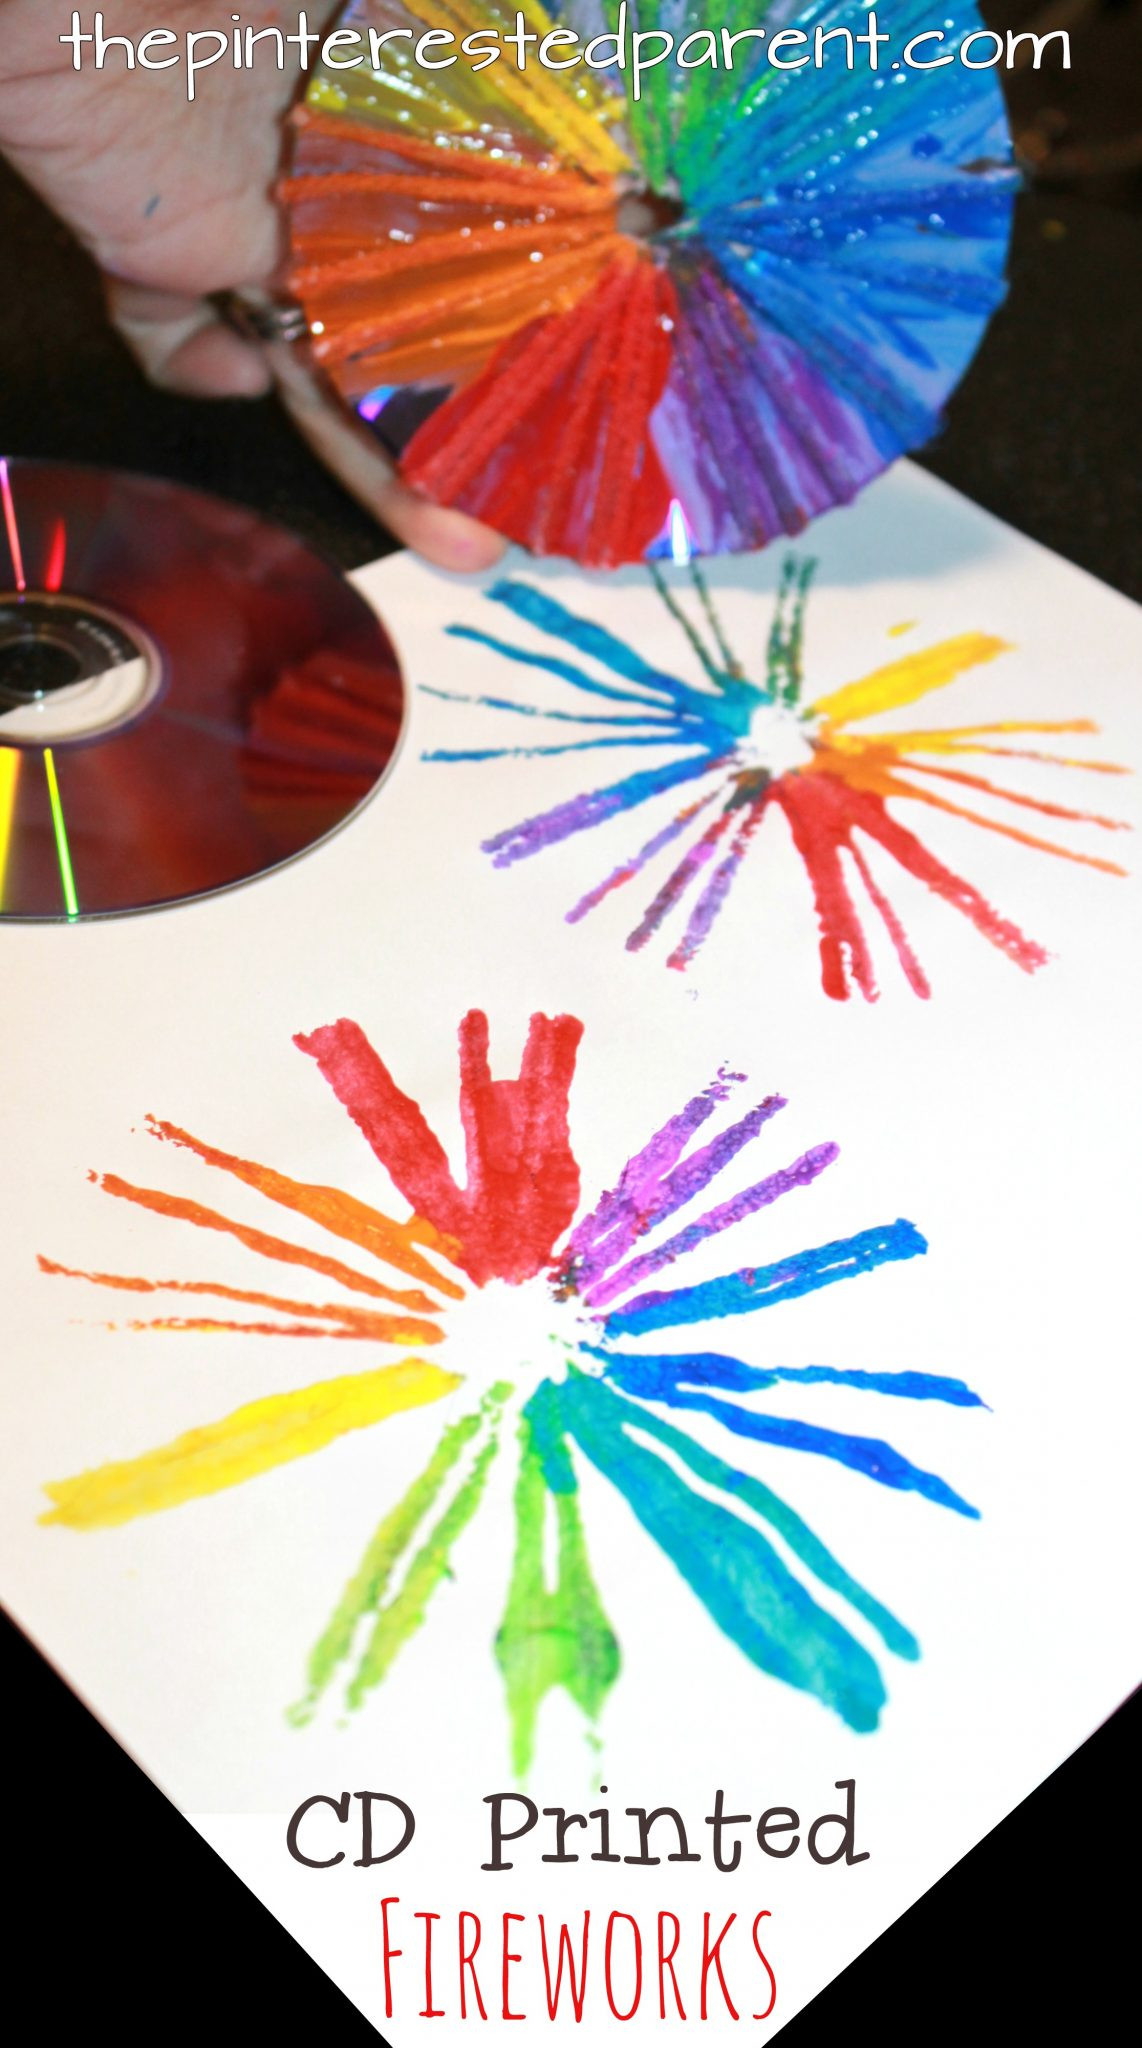 Preschoolers Arts And Crafts
 Printmaking With Cds For Kids – The Pinterested Parent